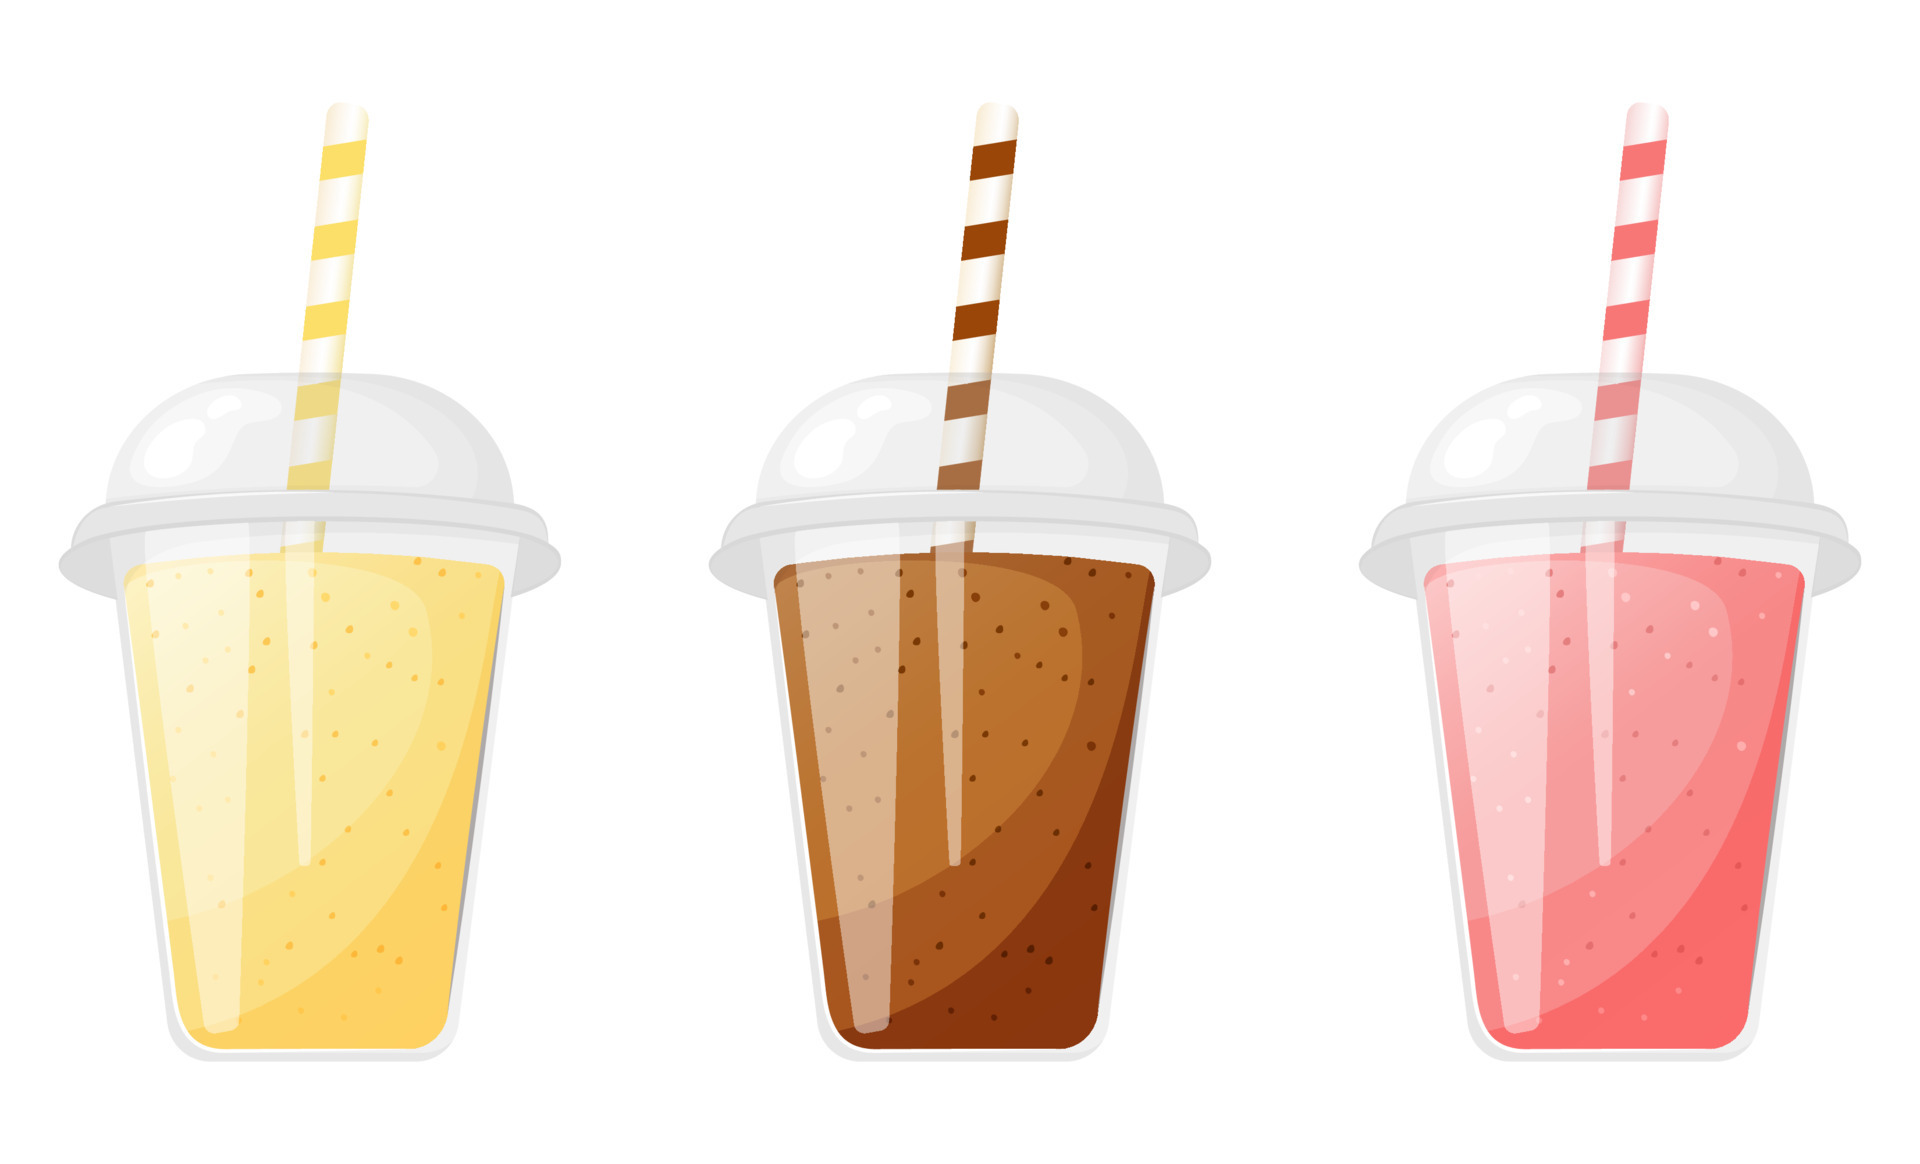 https://static.vecteezy.com/system/resources/previews/024/240/327/original/banana-strawberry-and-chocolate-milkshake-in-plastic-cup-with-straw-collection-vector.jpg